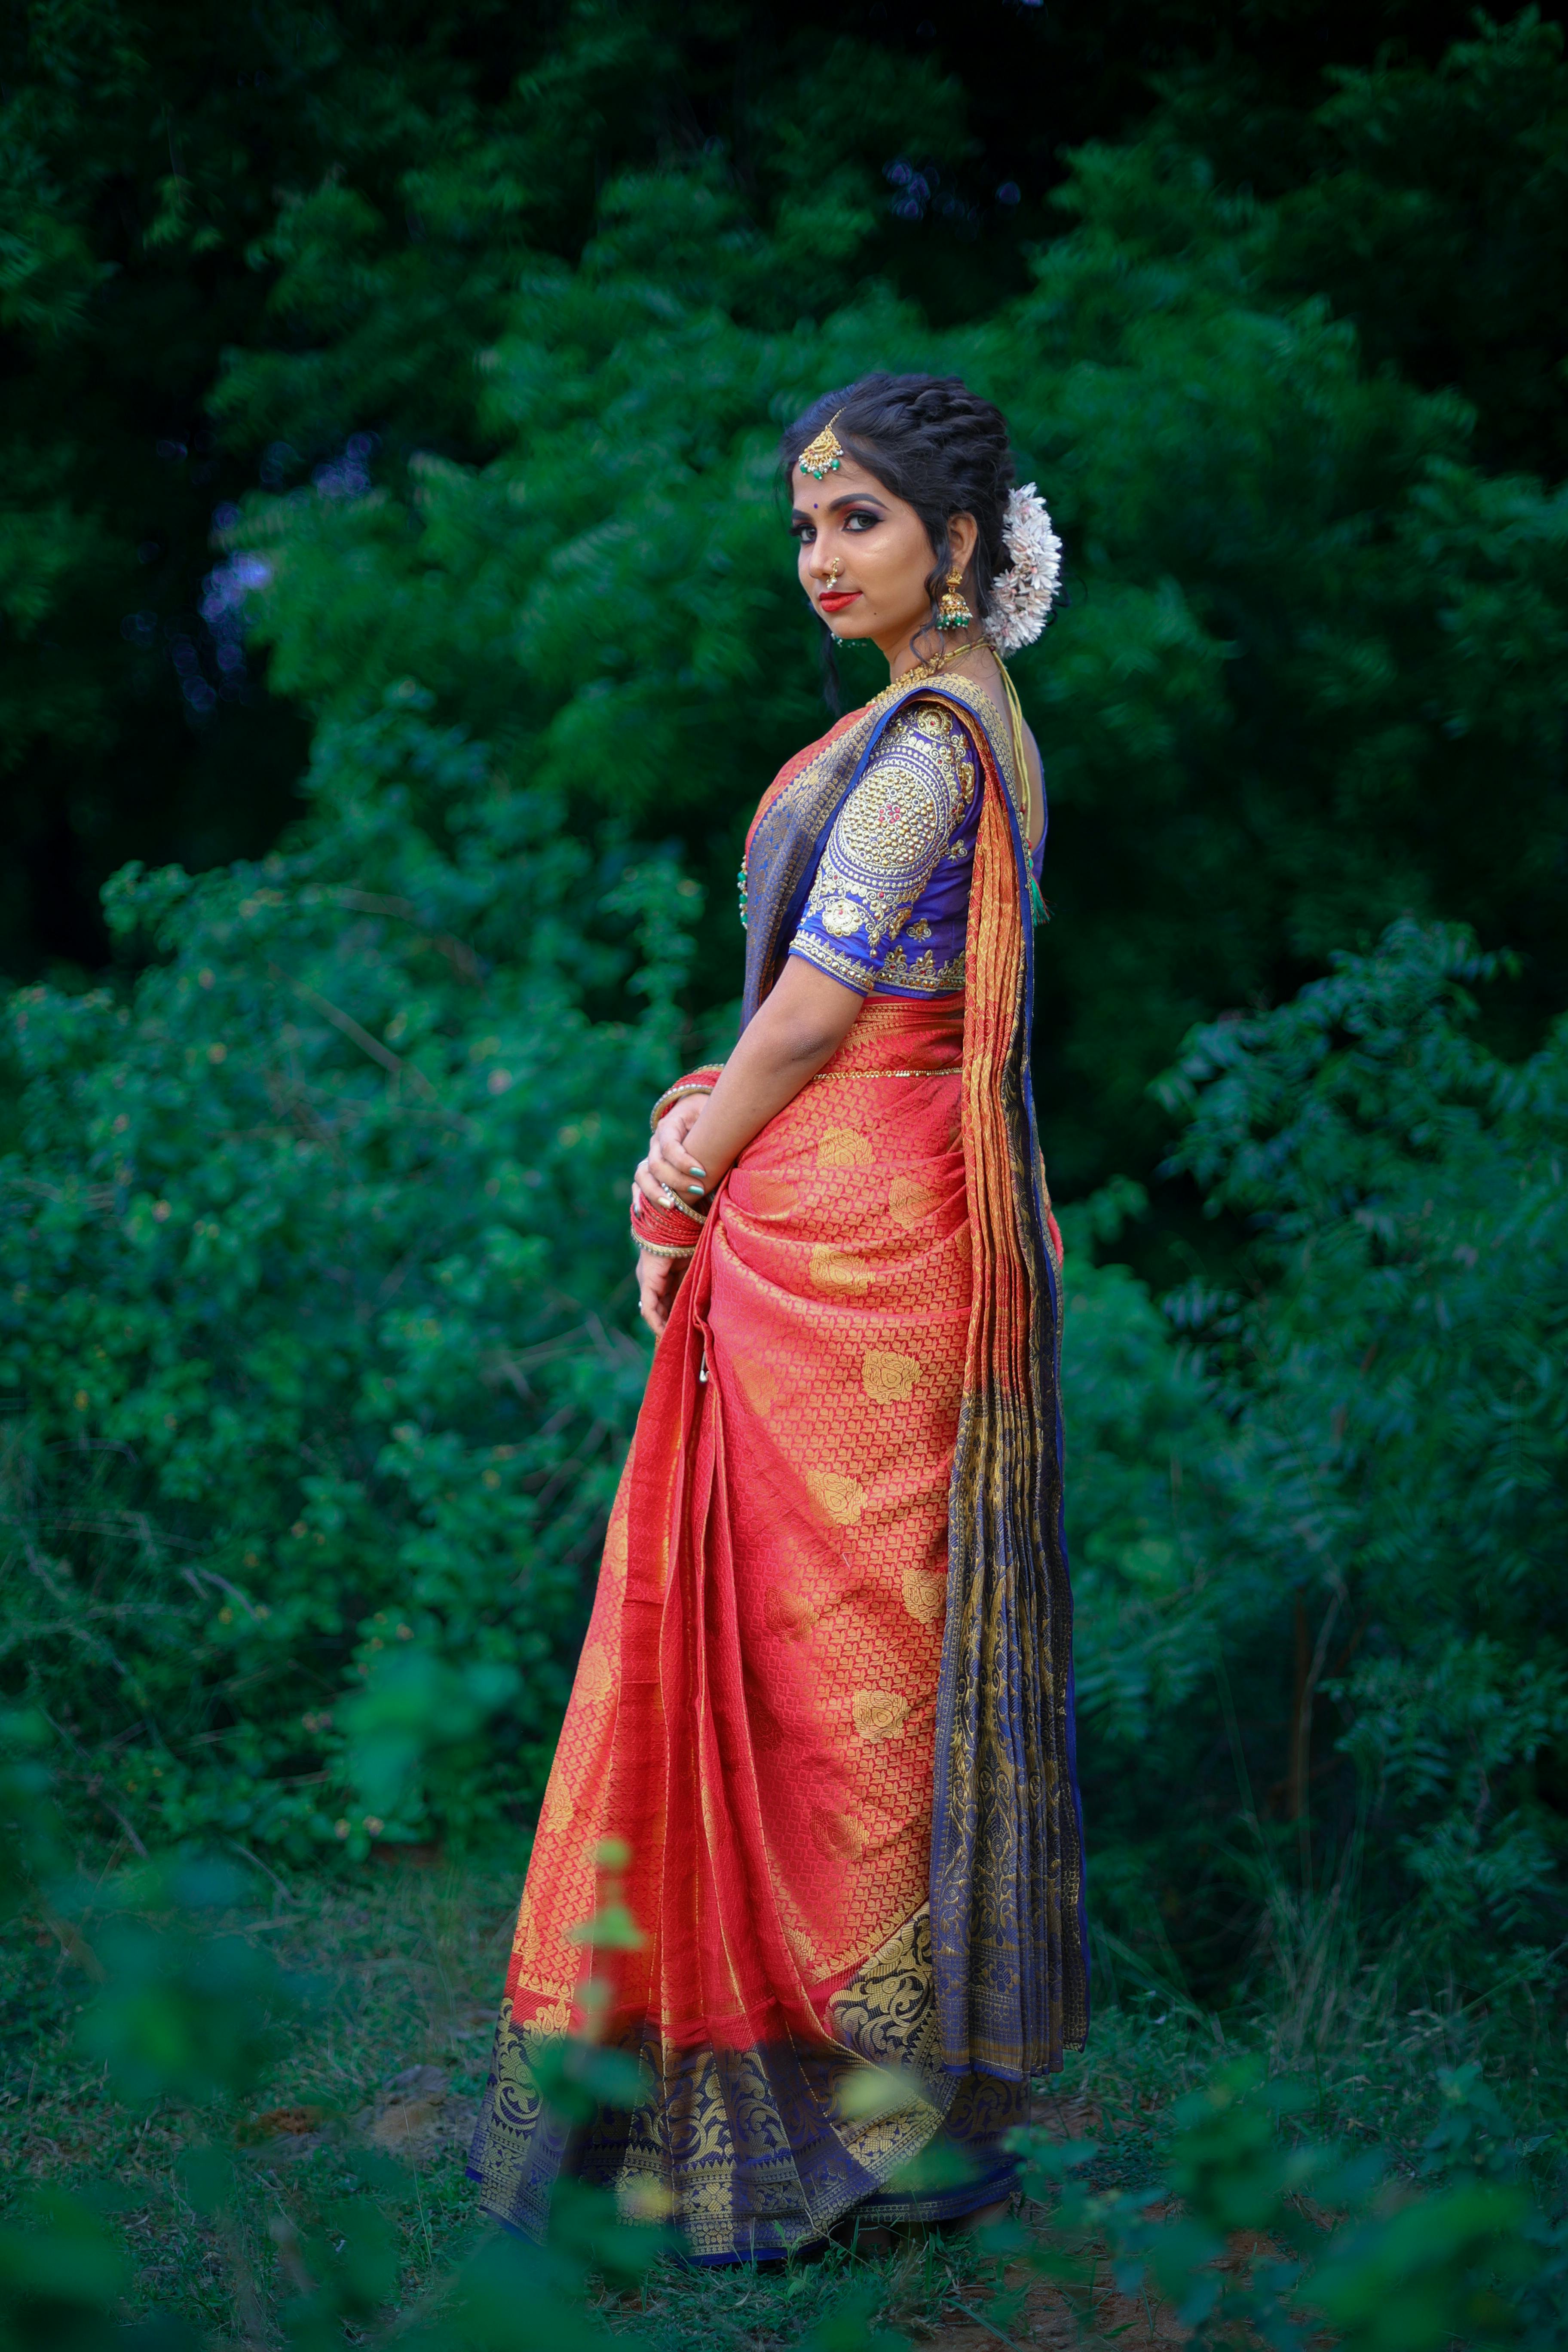 free photo of woman posing in traditional clothing